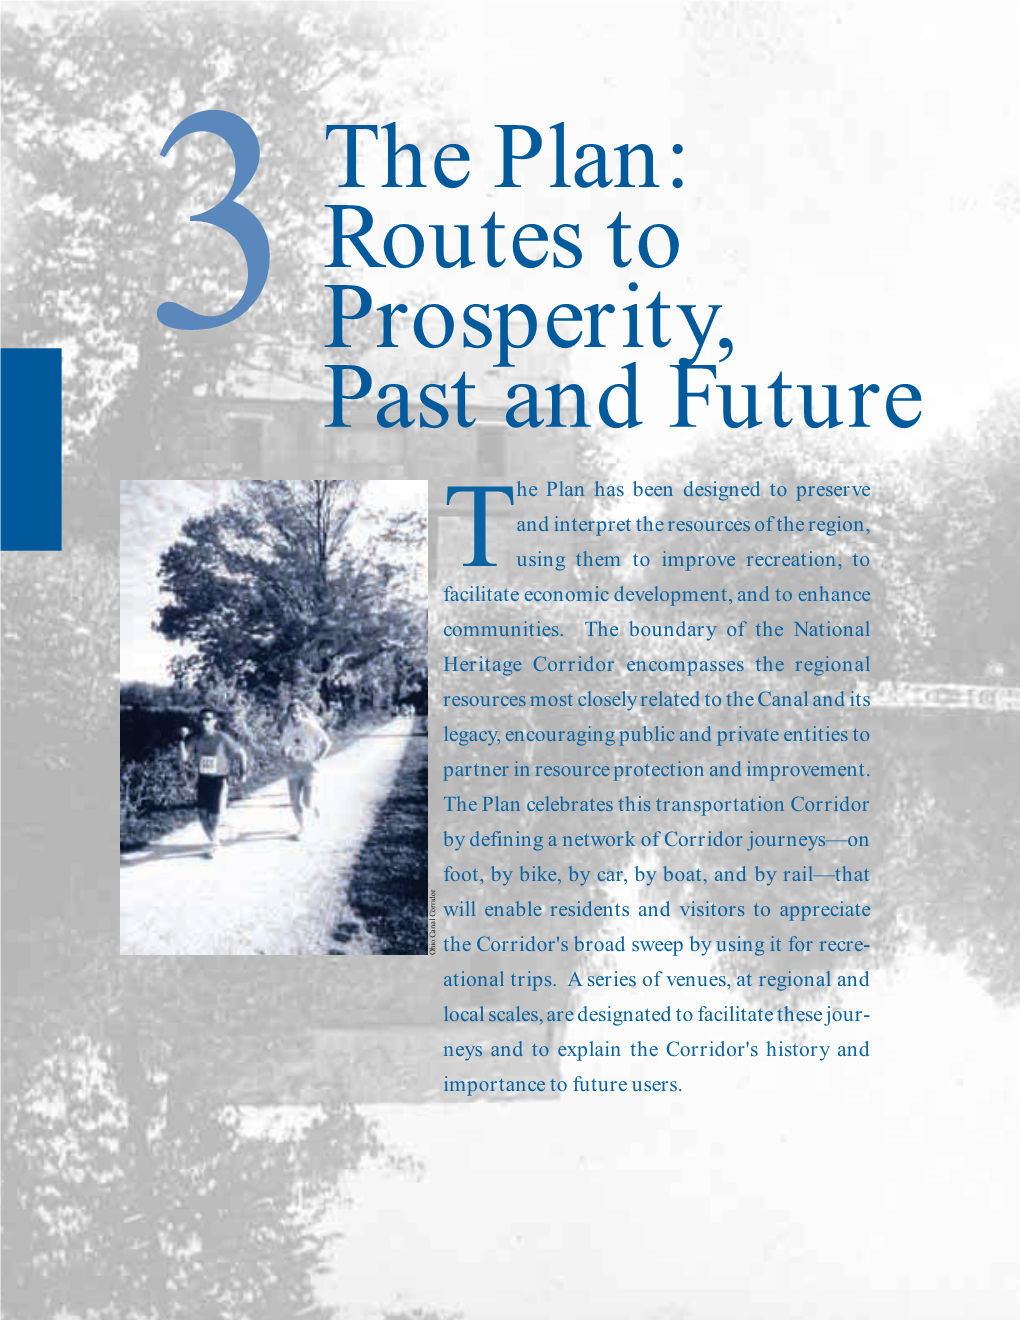 3The Plan: Routes to Prosperity, Past and Future